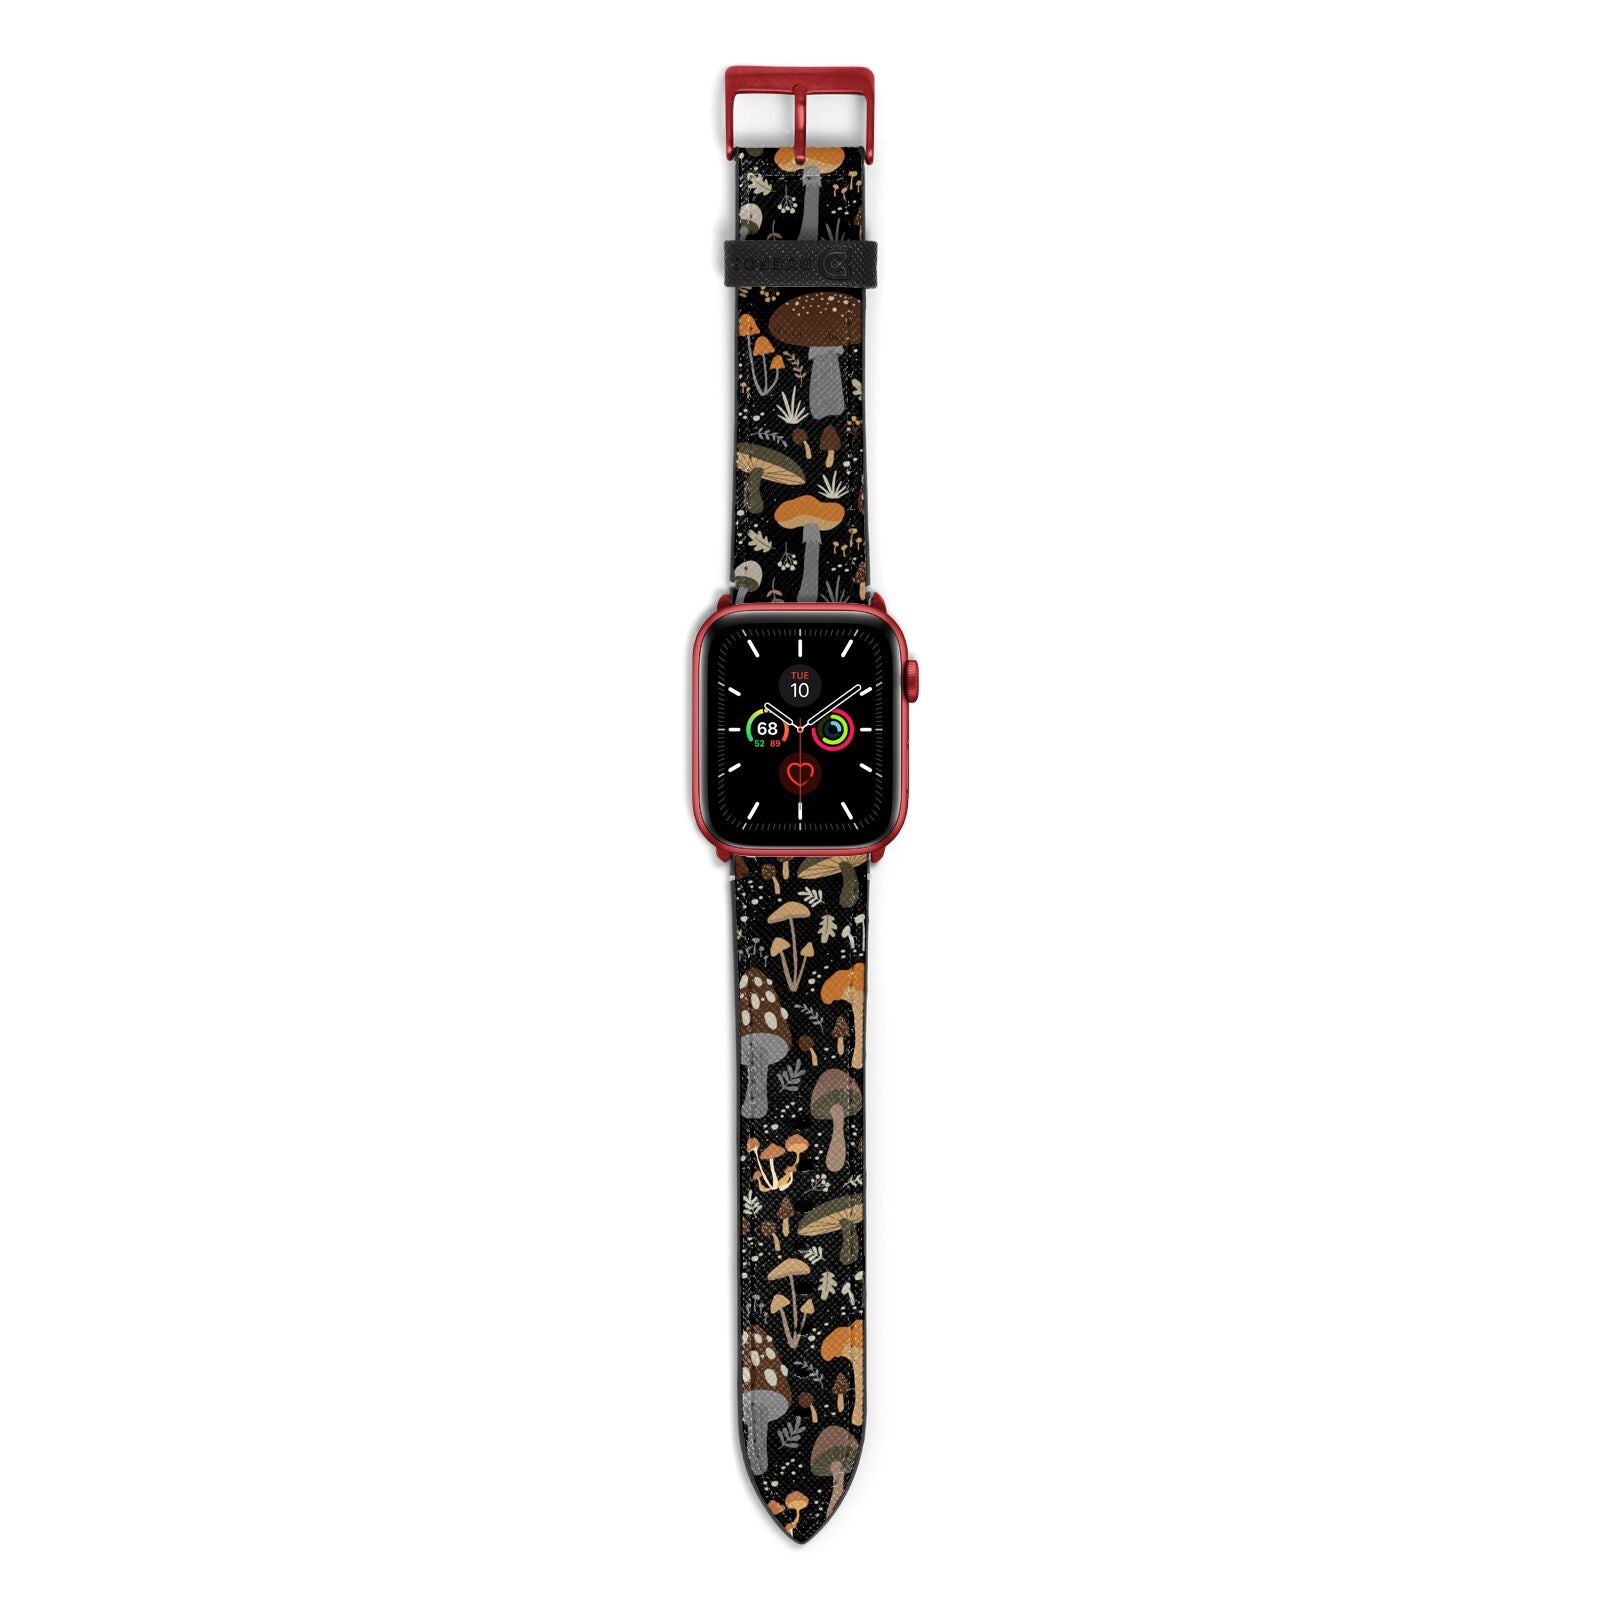 Mushroom Apple Watch Strap with Red Hardware